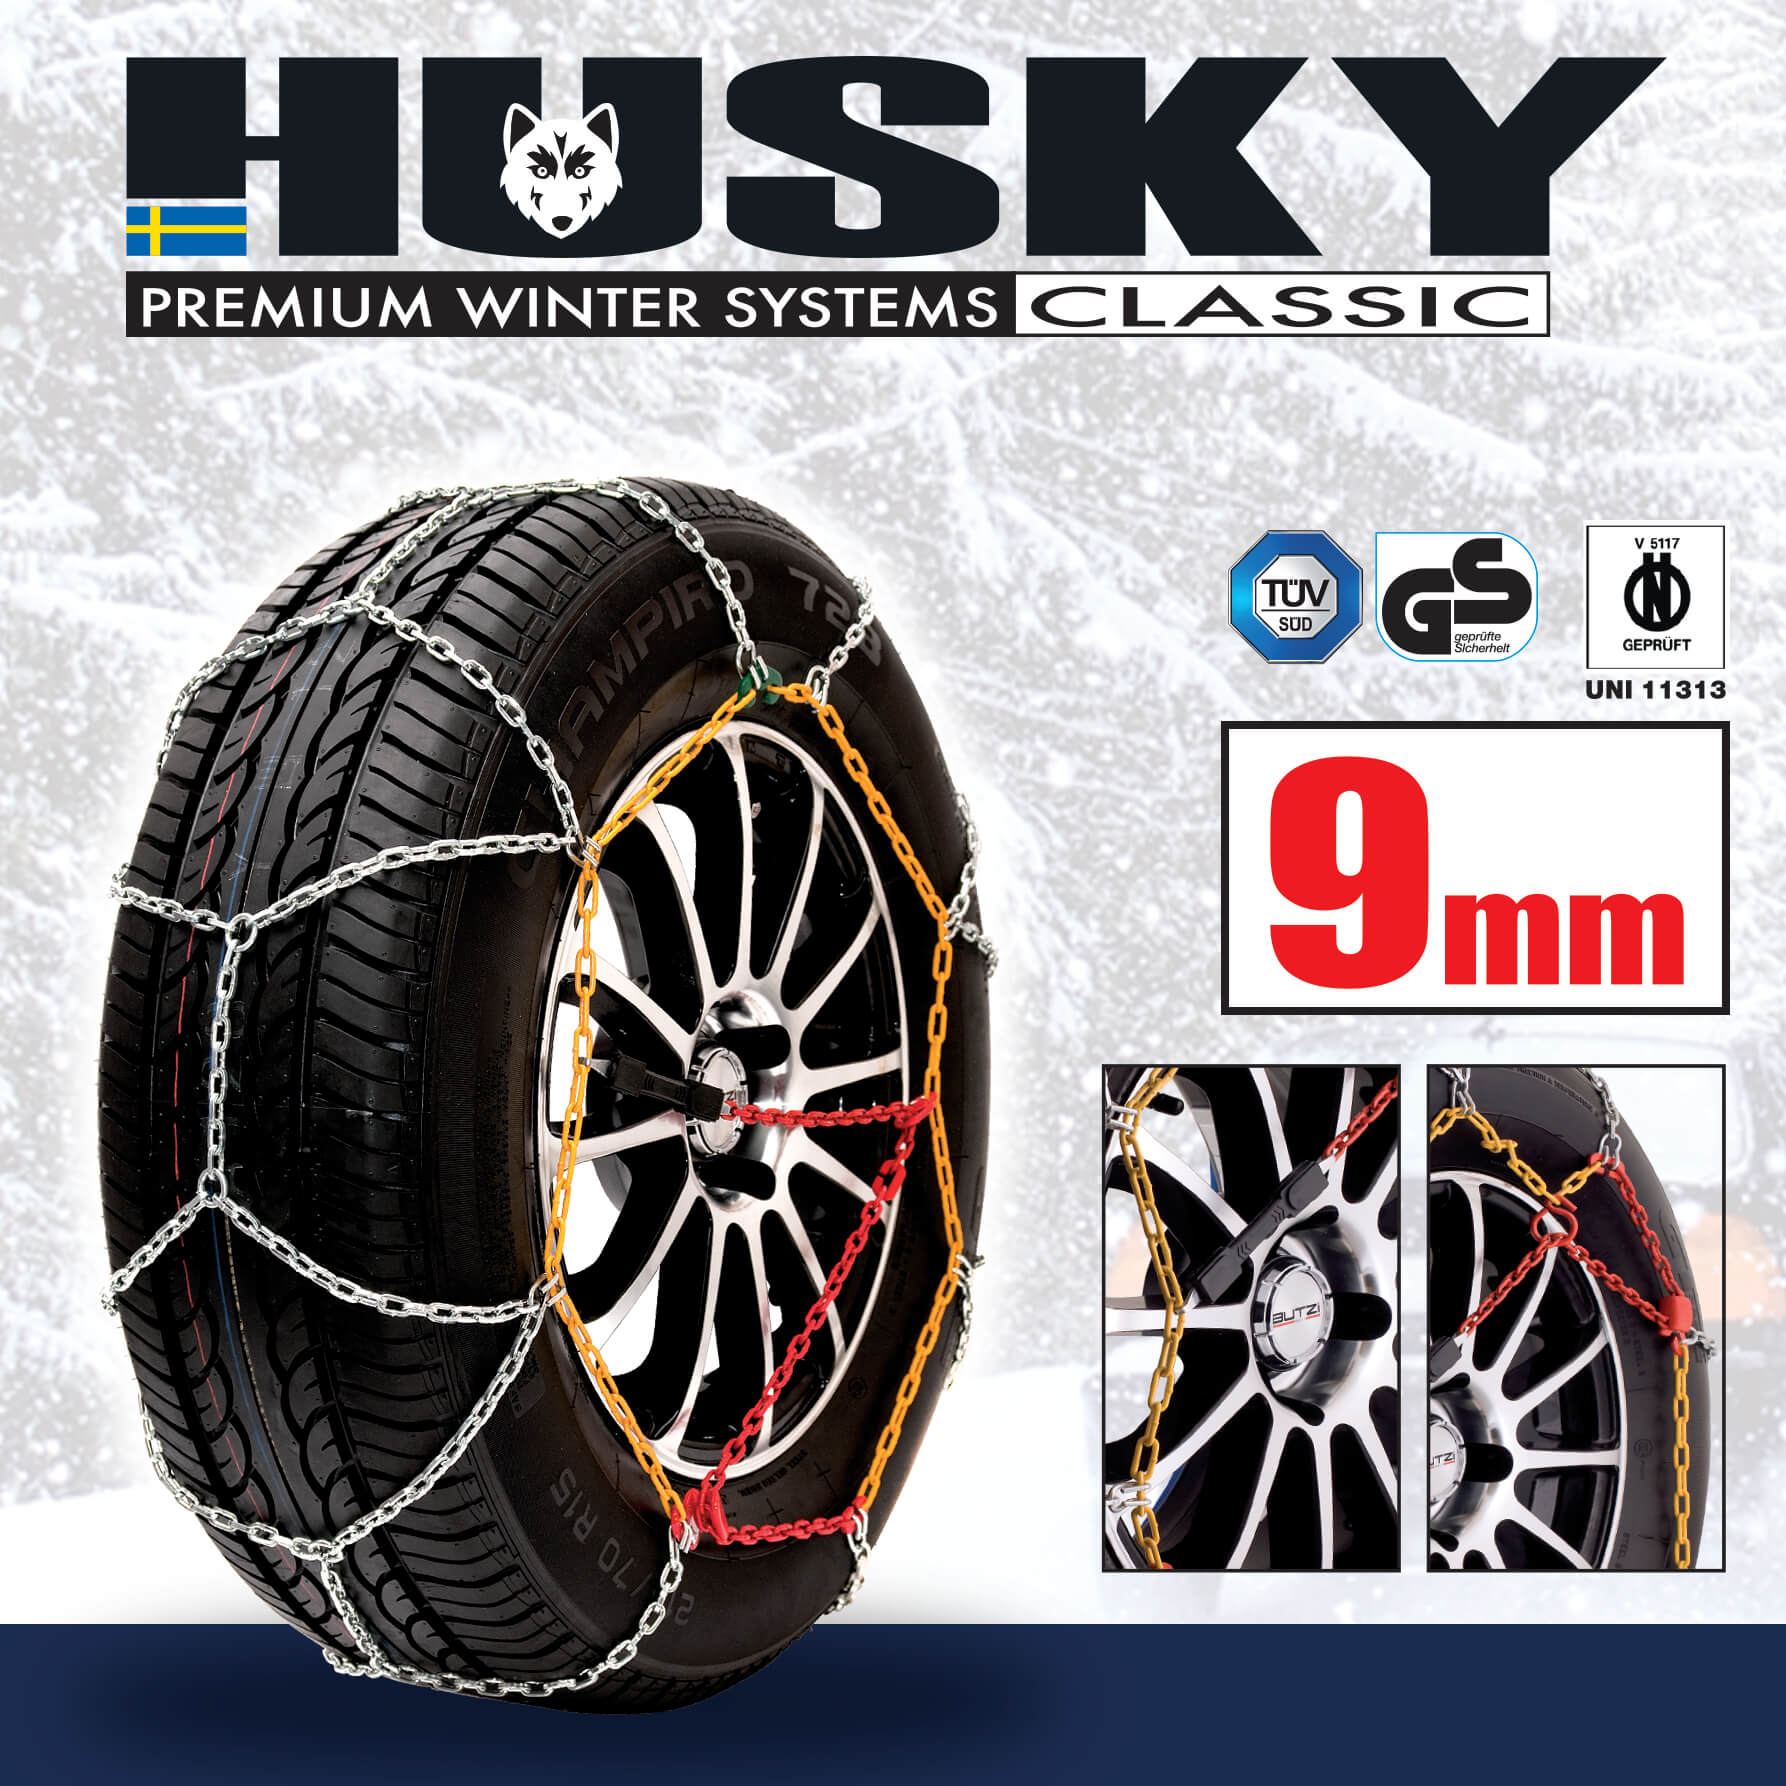 Sumex Husky Winter Classic Alloy Steel Snow Chains for 18 Car Wheel Tires 235/45 R18 